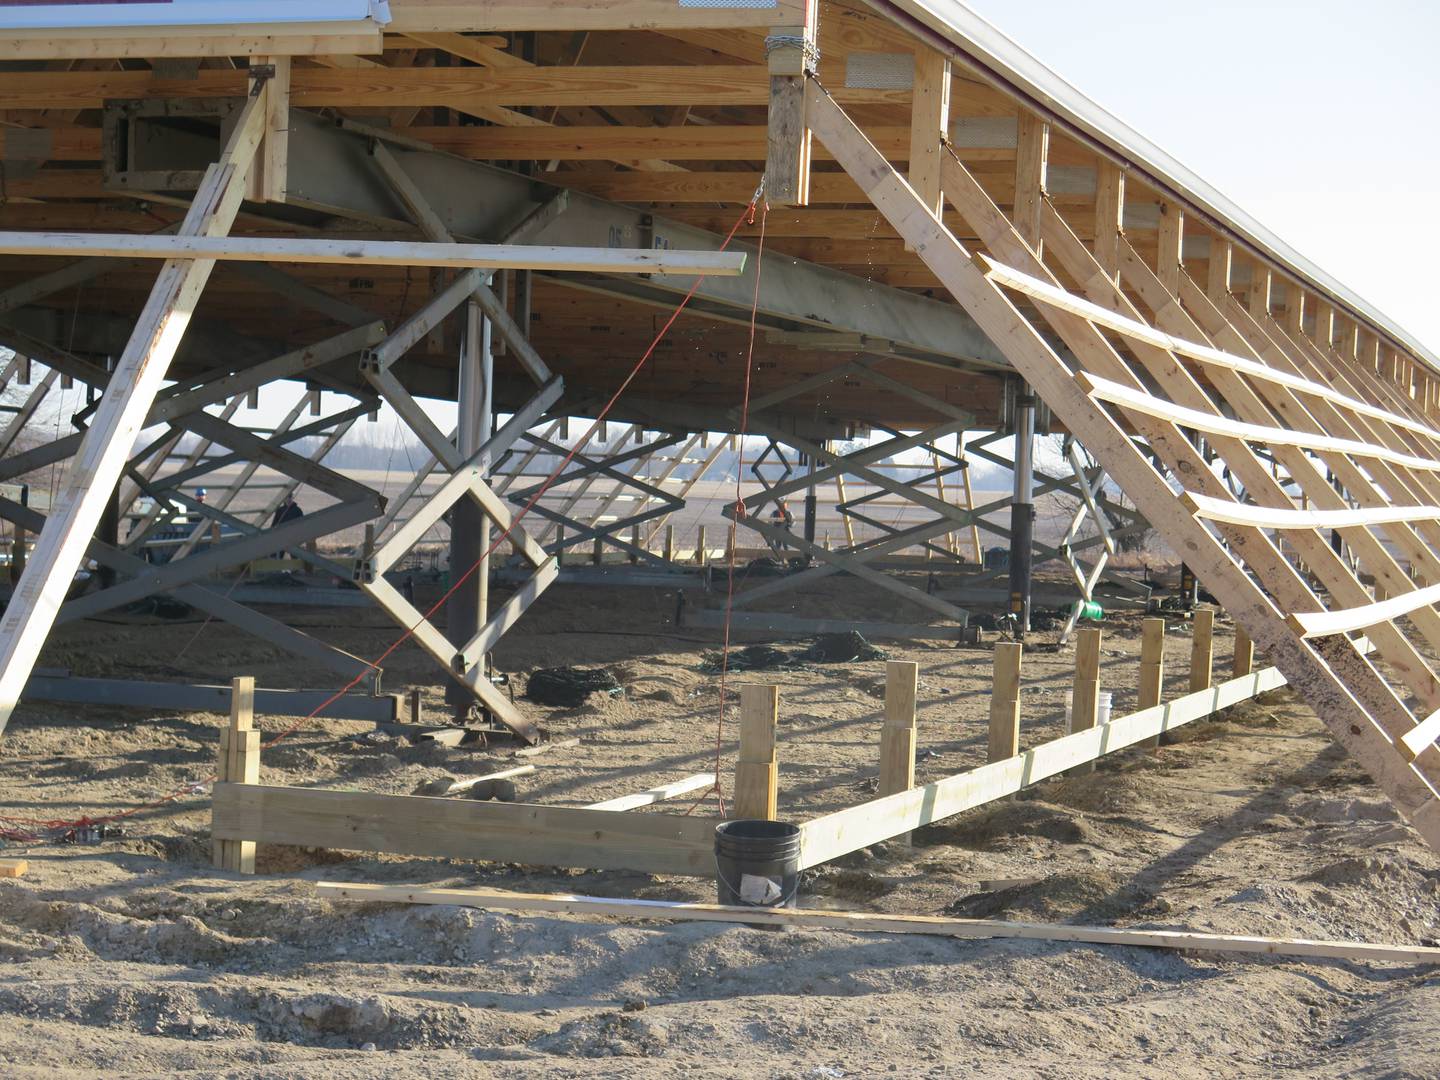 Eight hydraulic lifts connected to steel beams synchronously raise the roof as the hinged wall columns move inward toward the ground base of the barn.